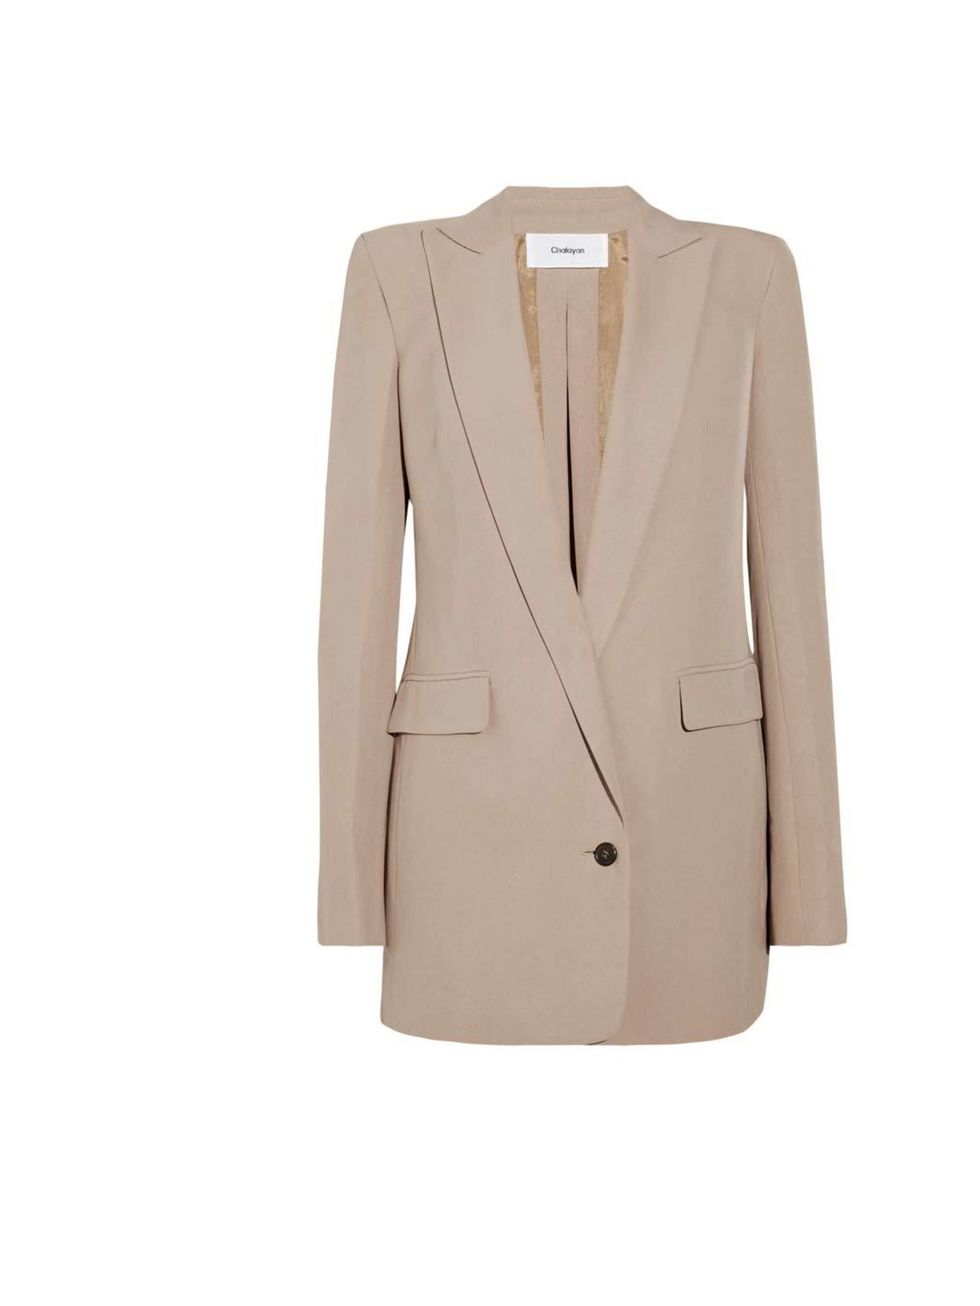 <p>Beautiful beige Hussein Chalayan blazer, £335 from<a href="http://www.theoutnet.com/product/361586"> the Outnet </a></p>